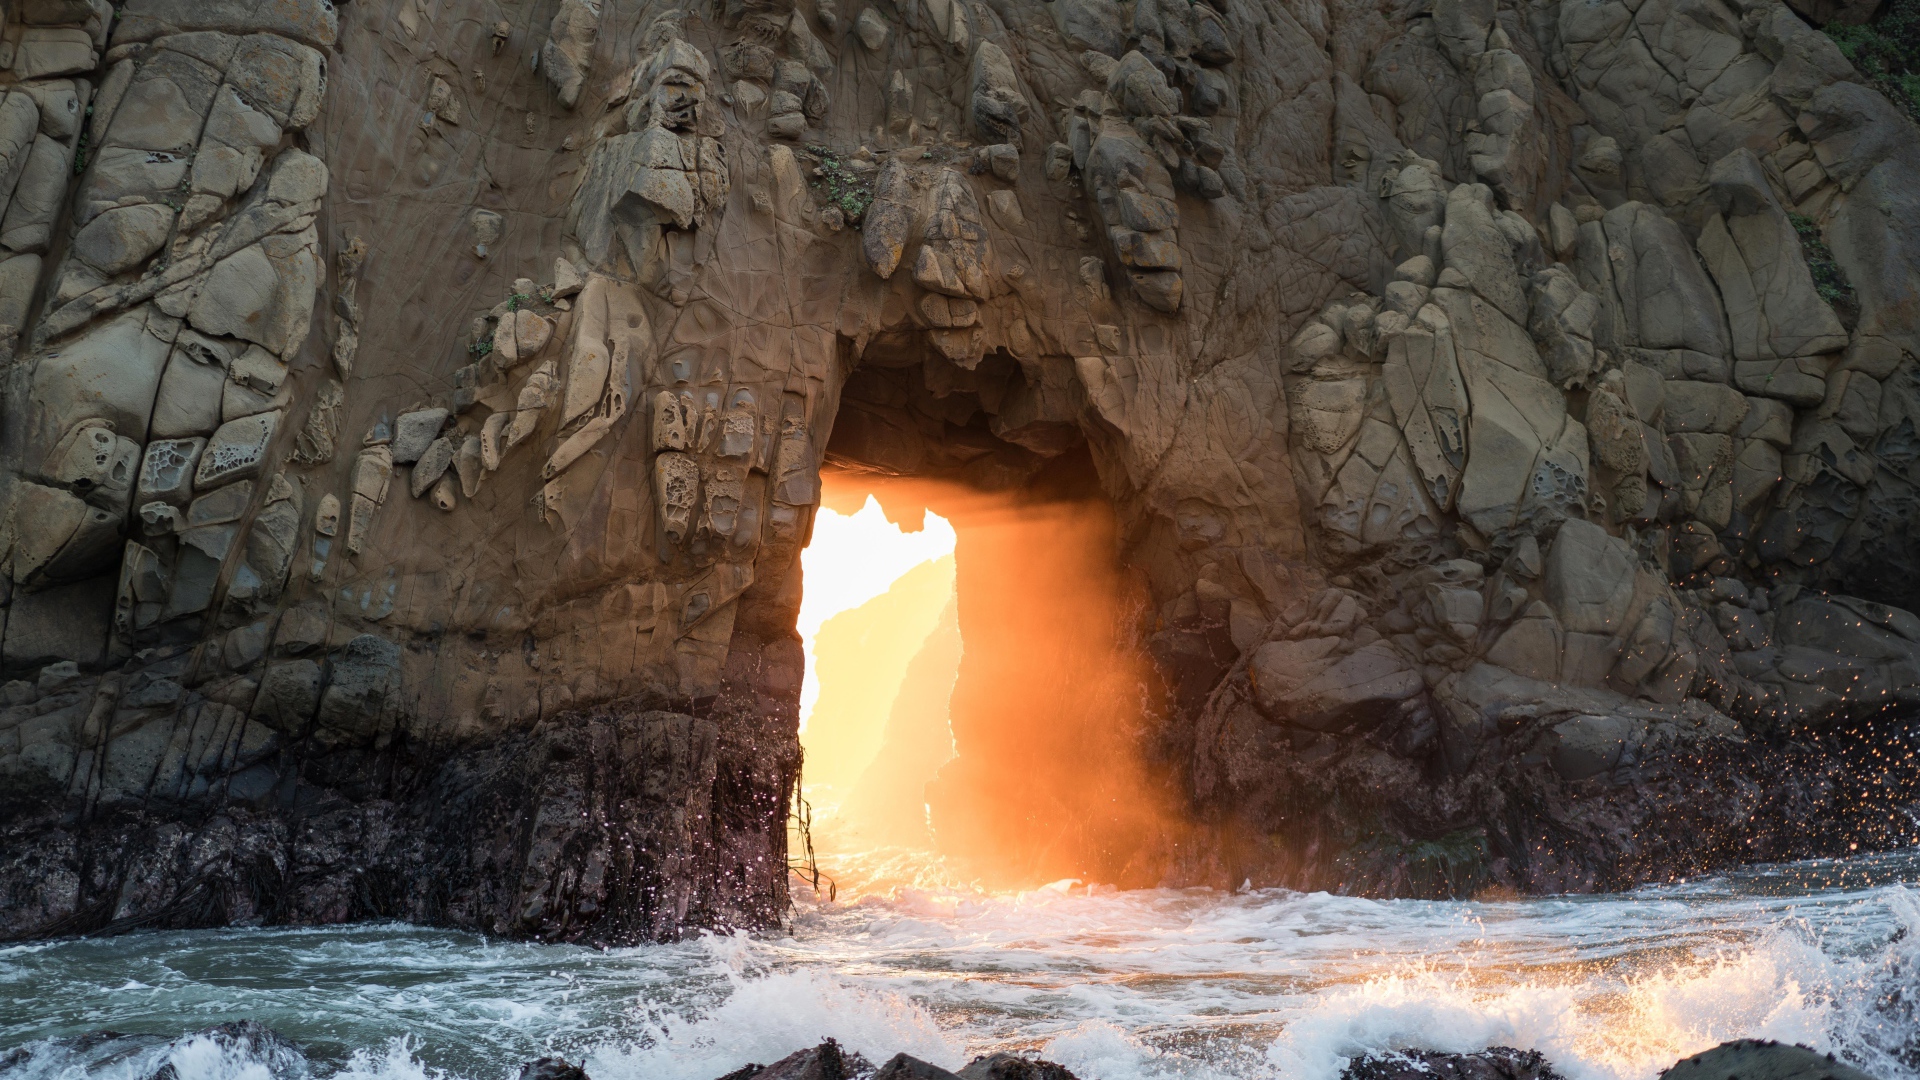 Passage in a cave in the ocean